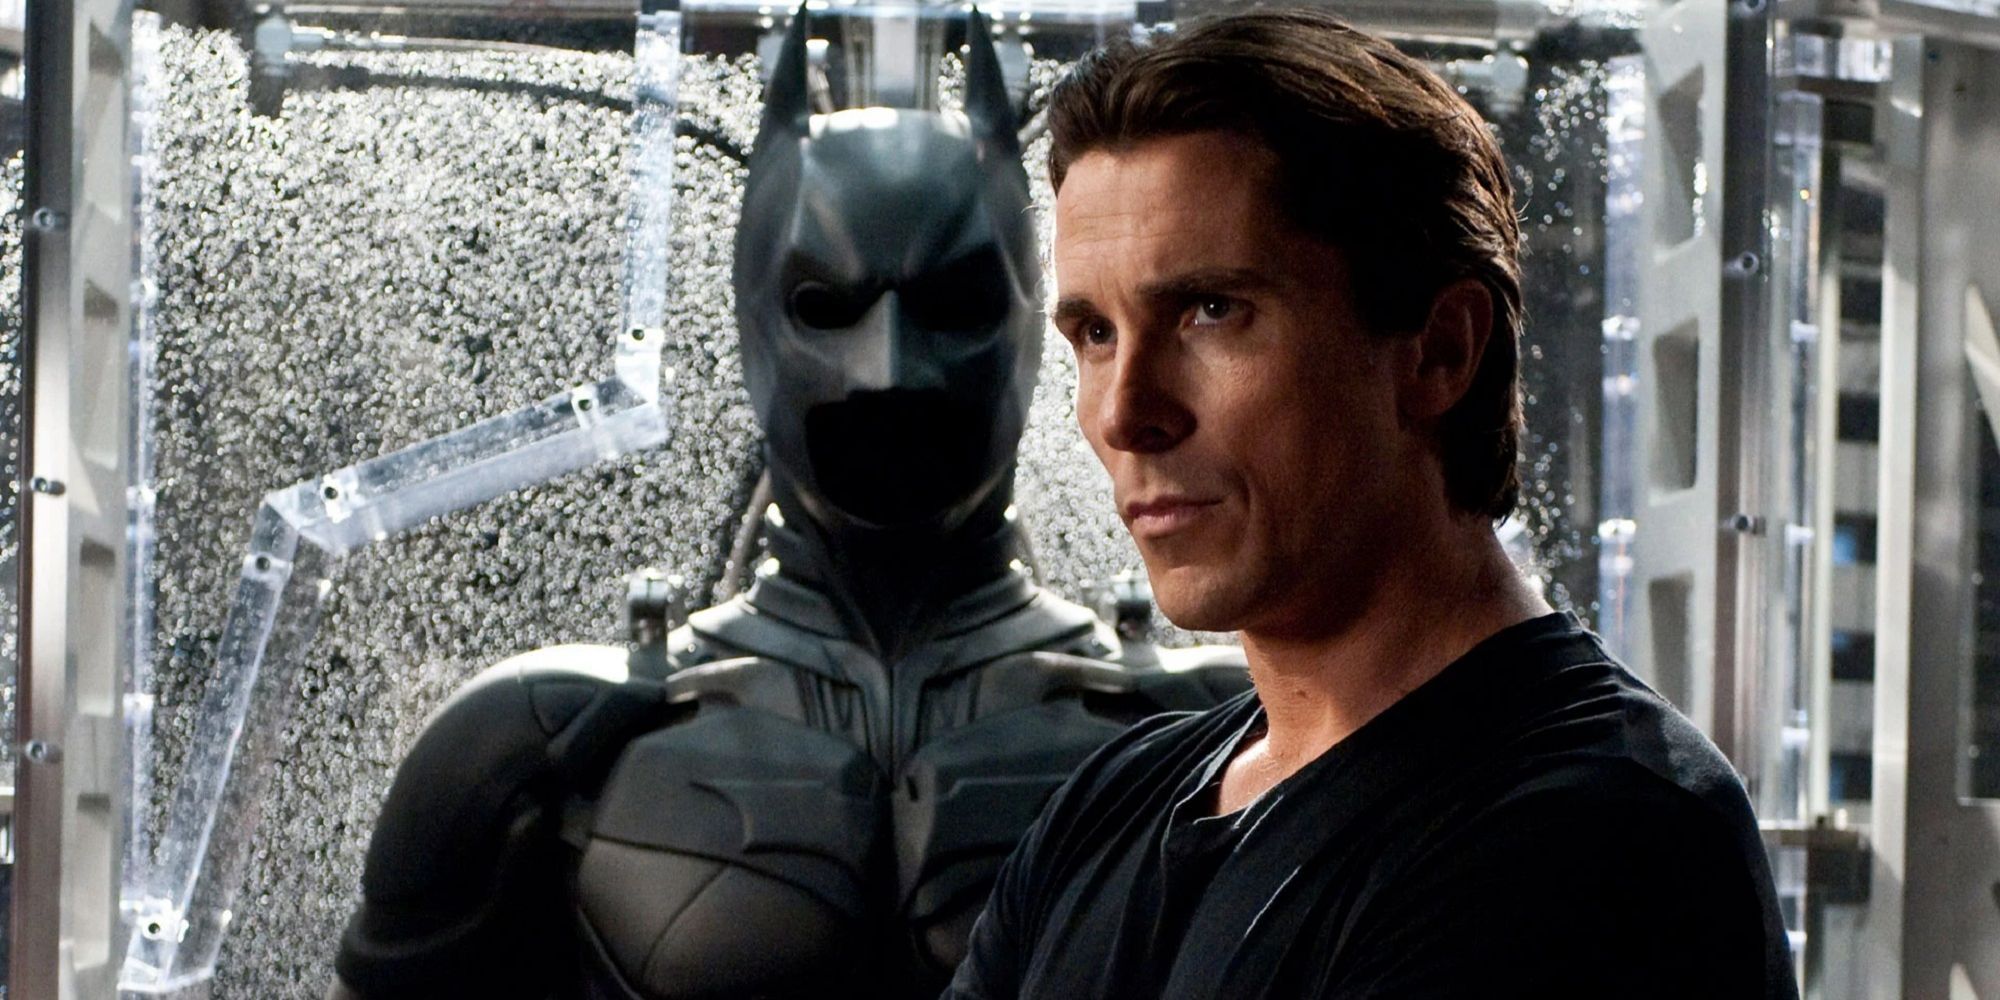 Christian Bale Is Open To Returning To Batman If Christopher Nolan Asks